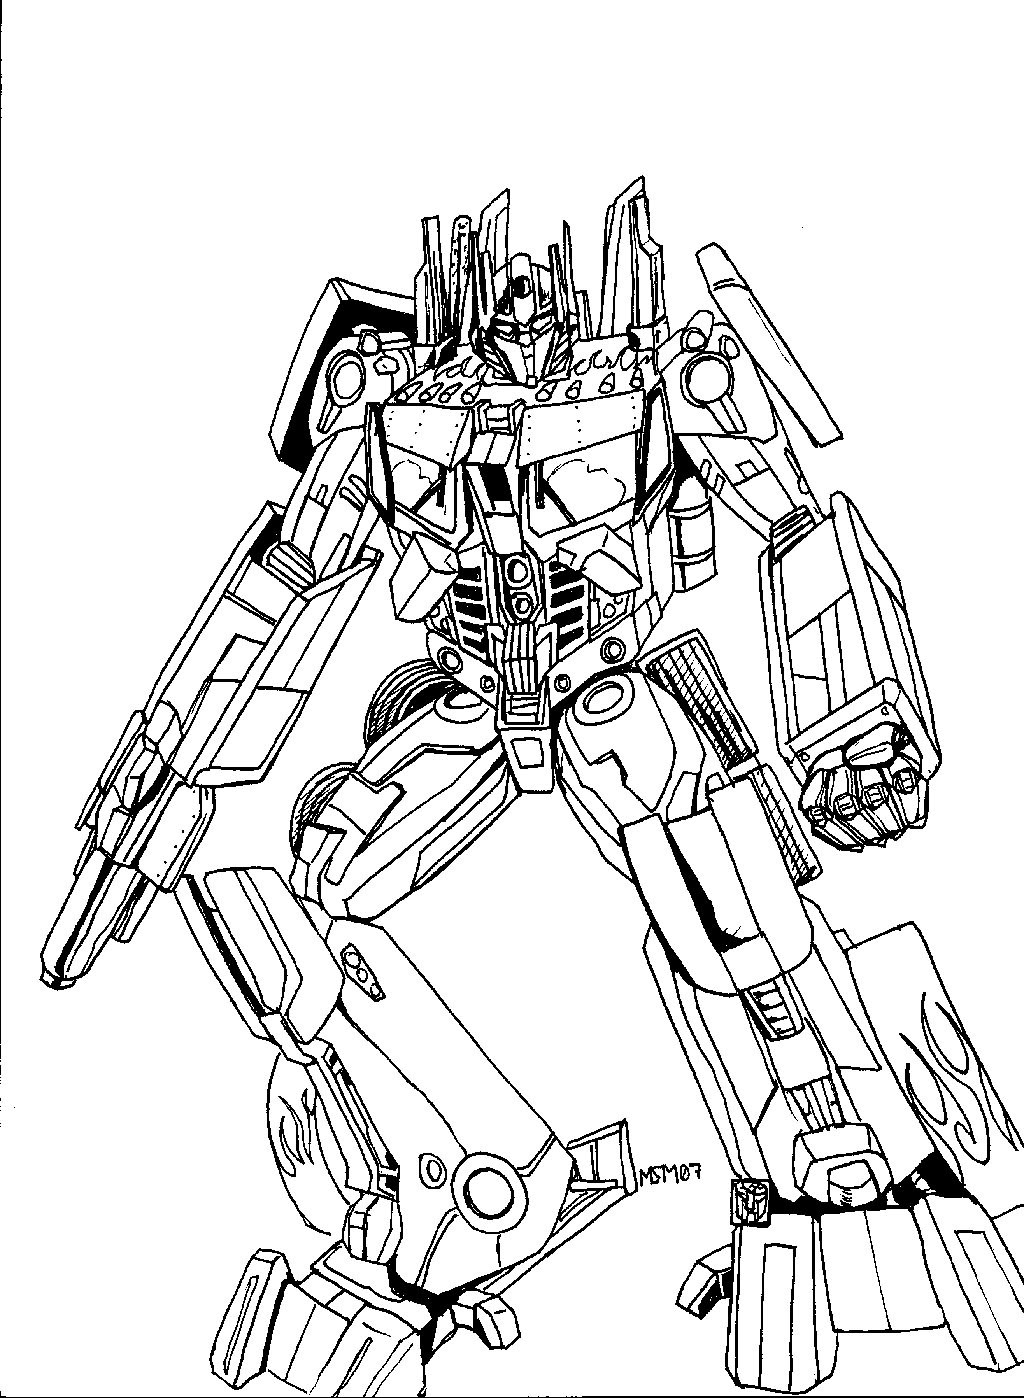 Printable Transformers Coloring Pages Free Printable Transformers Coloring Pages For Kids For Transformer